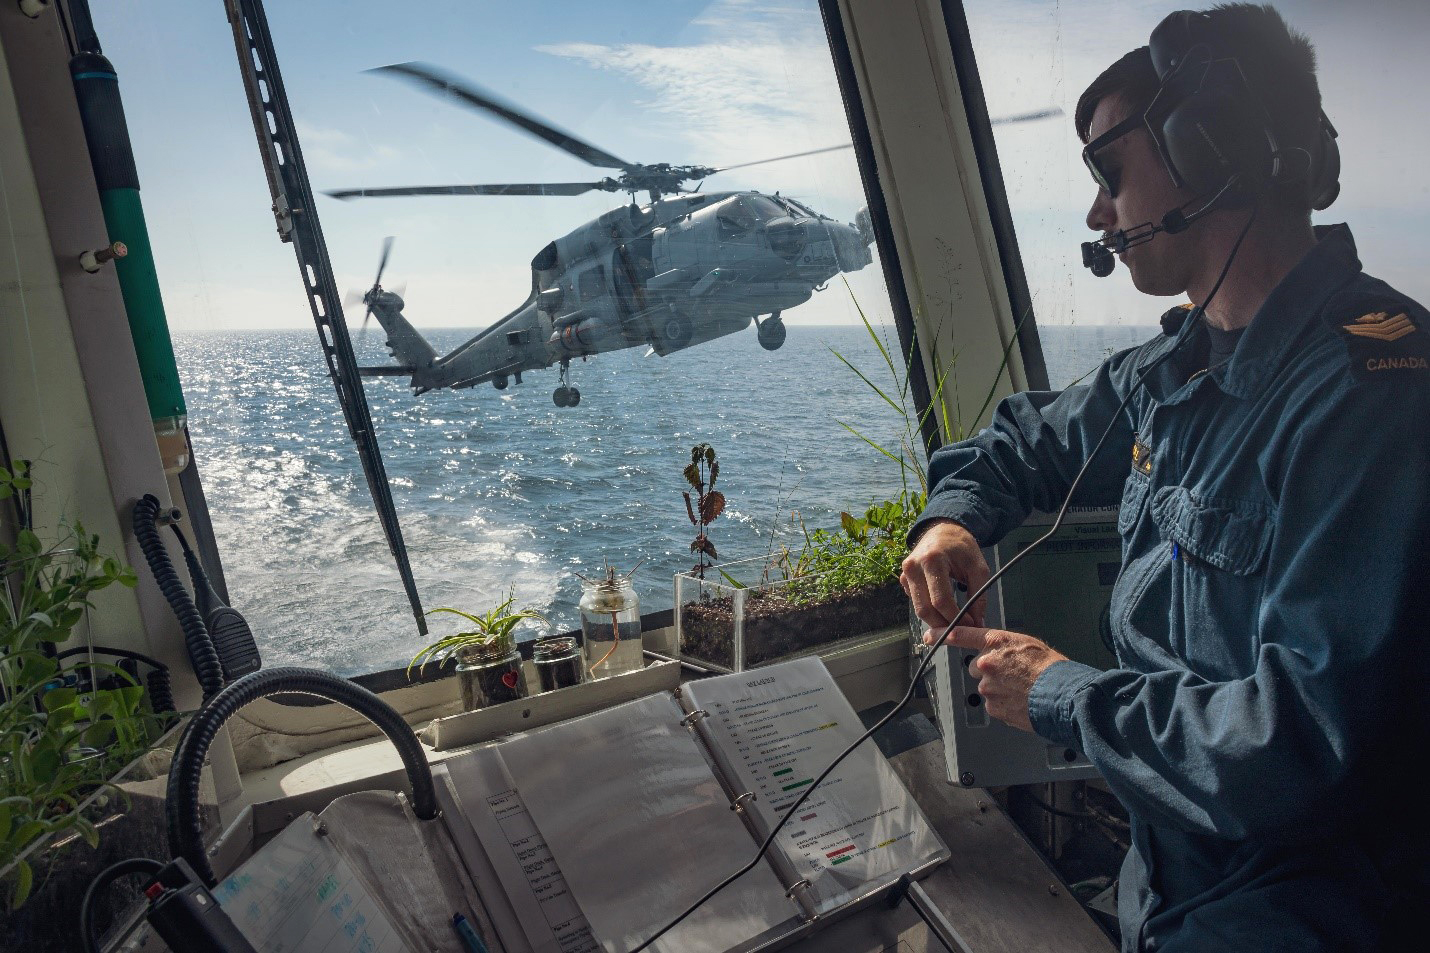 The MH-60 Seahawk Maritime Helicopter from HDMS Absalon conducts cross deck training with HMCS Halifax on June 8. Photo: SNMG1